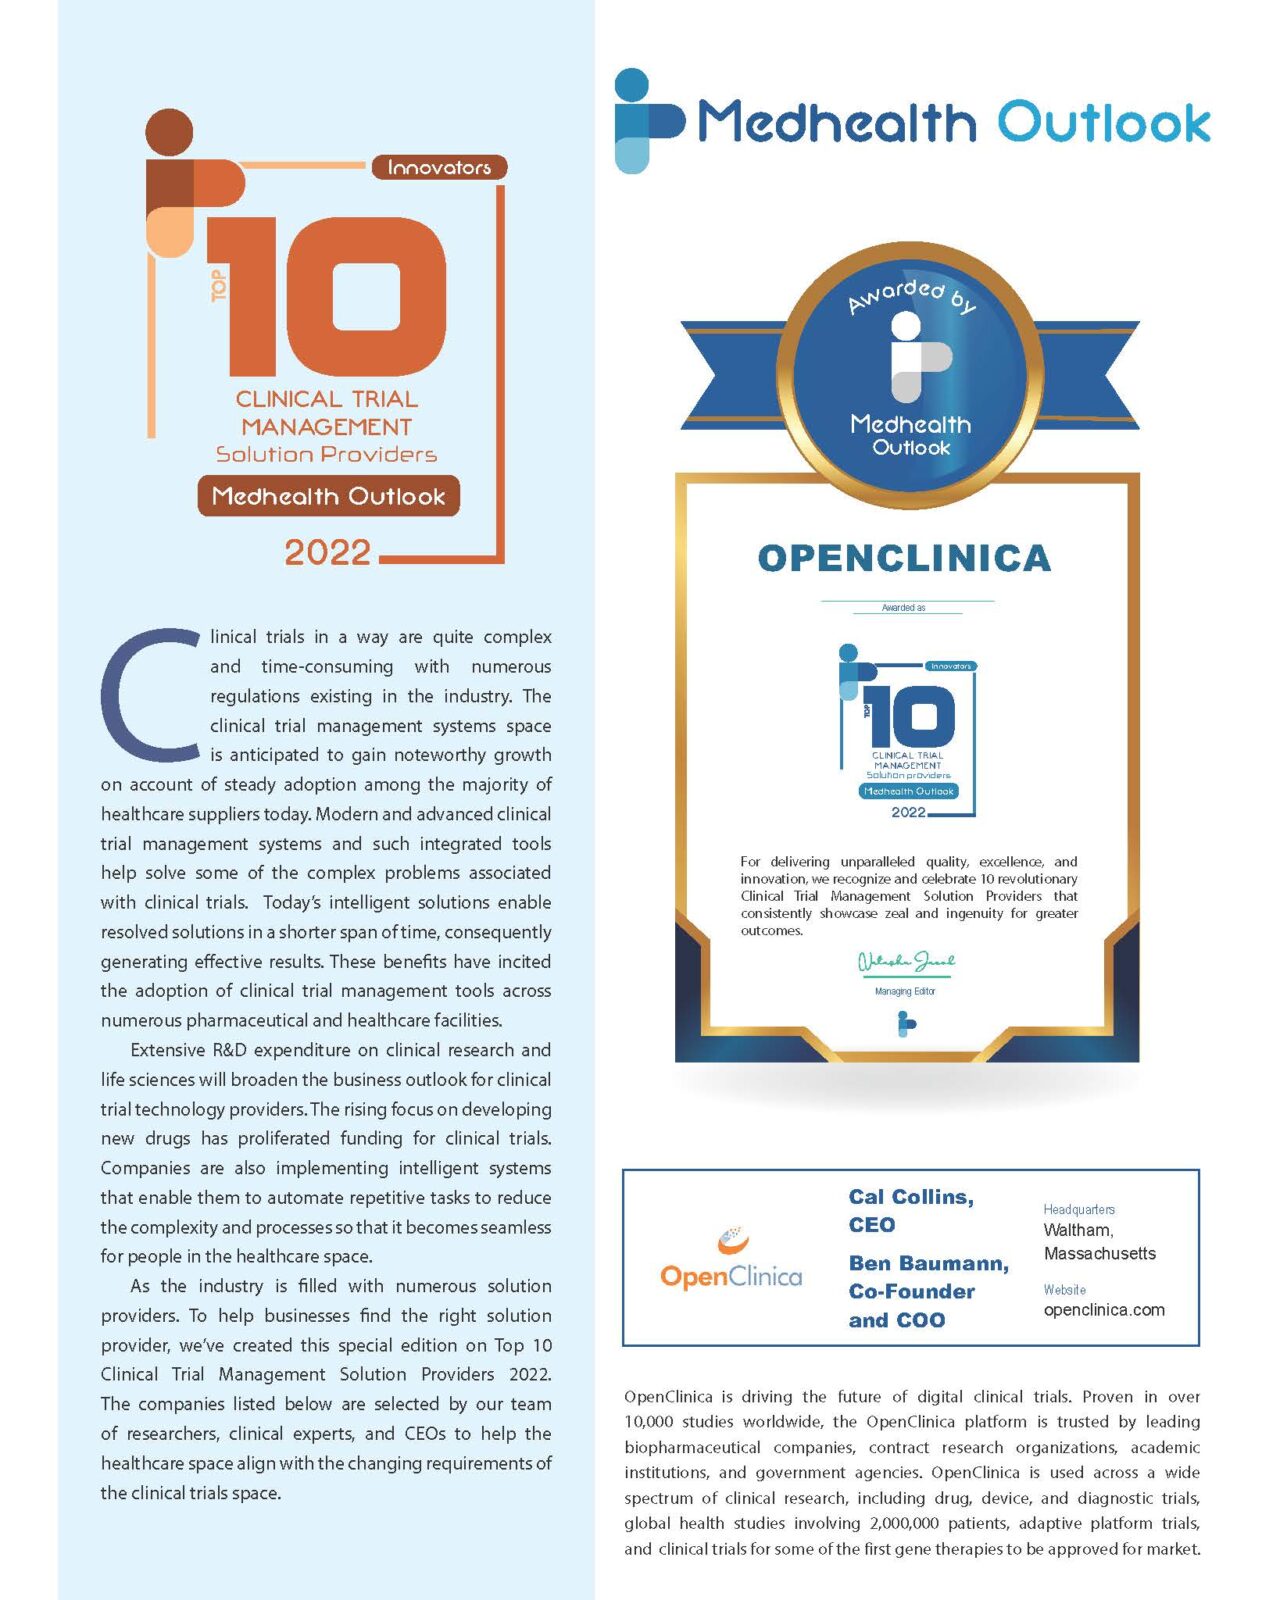 Medhealth-Outlook_OpenClinica-Feature-Top-10_Page_4